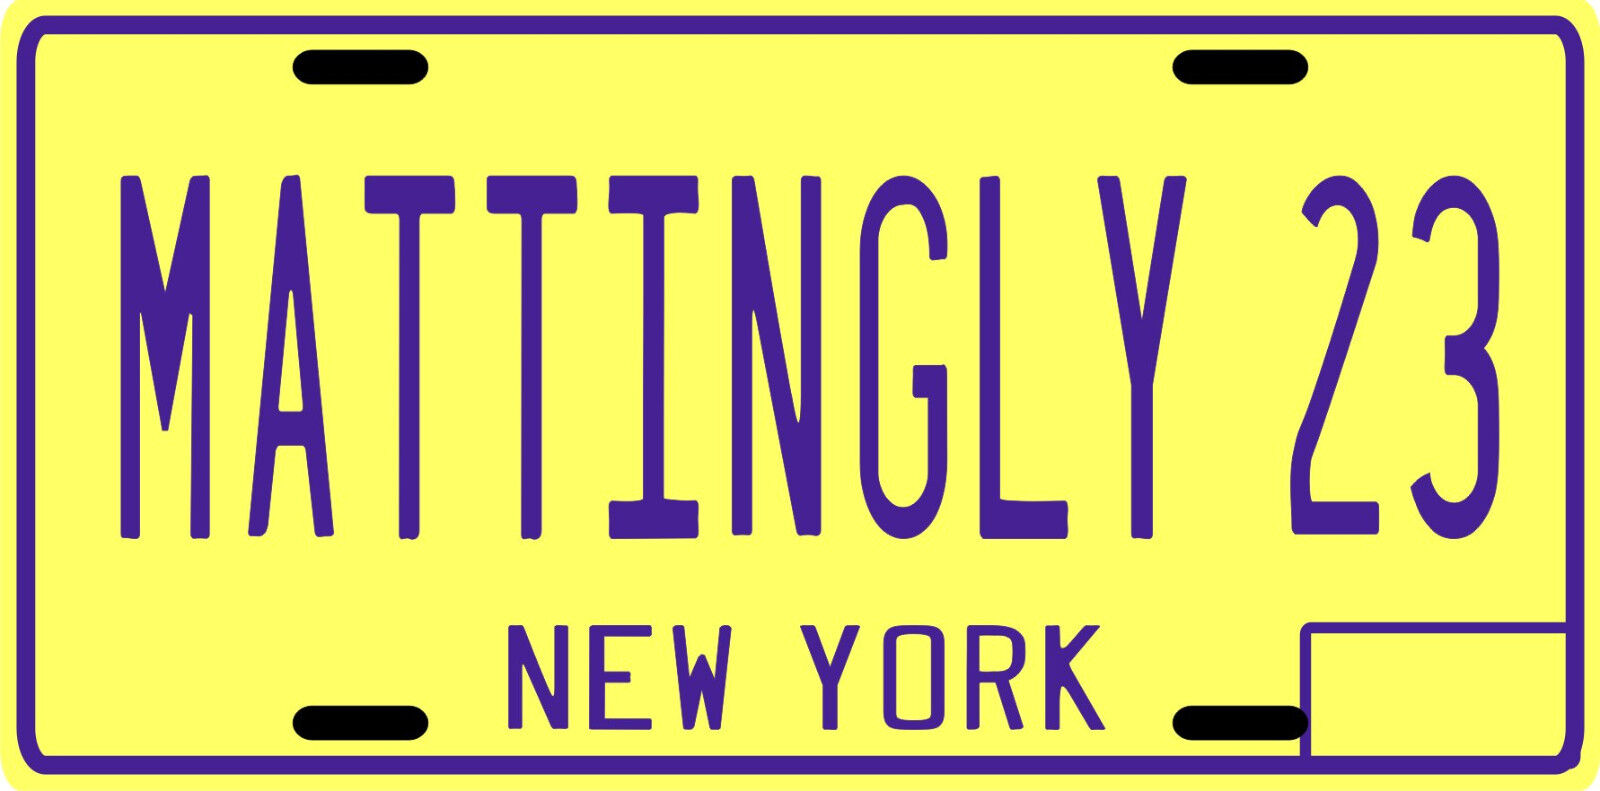 Don Mattingly New York Yankees Rookie 1982 License Plate